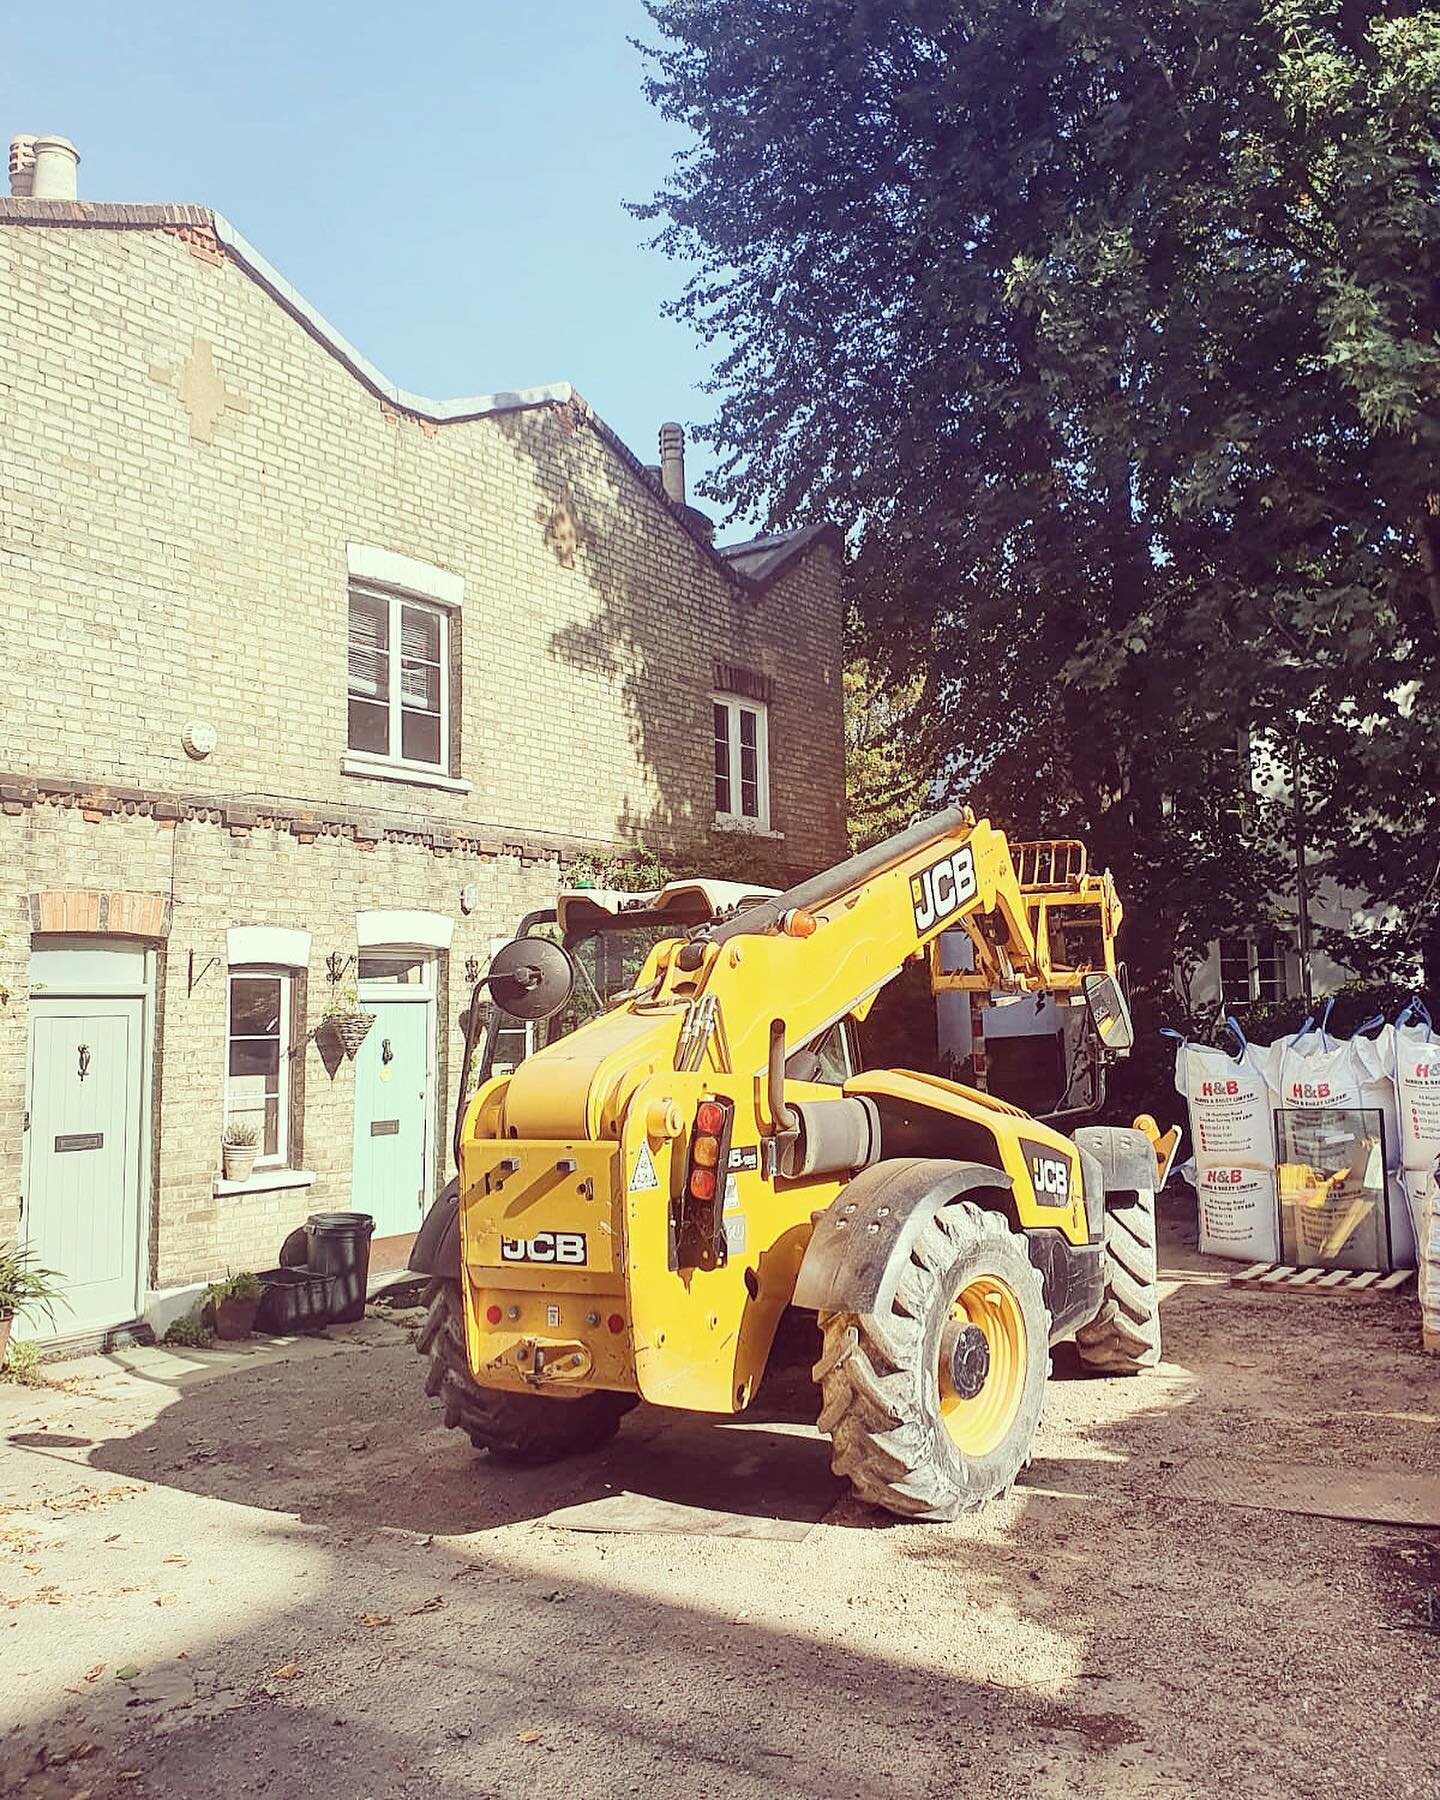 Boys and their toys 🚧

Driving this huge thing on site today!

_______________________________

#almaplaceproject #almaplace #crystalpalace #crystalpalacetriangle #londonproperty #southlondon #construction #constructionsite #building #buildingsite #